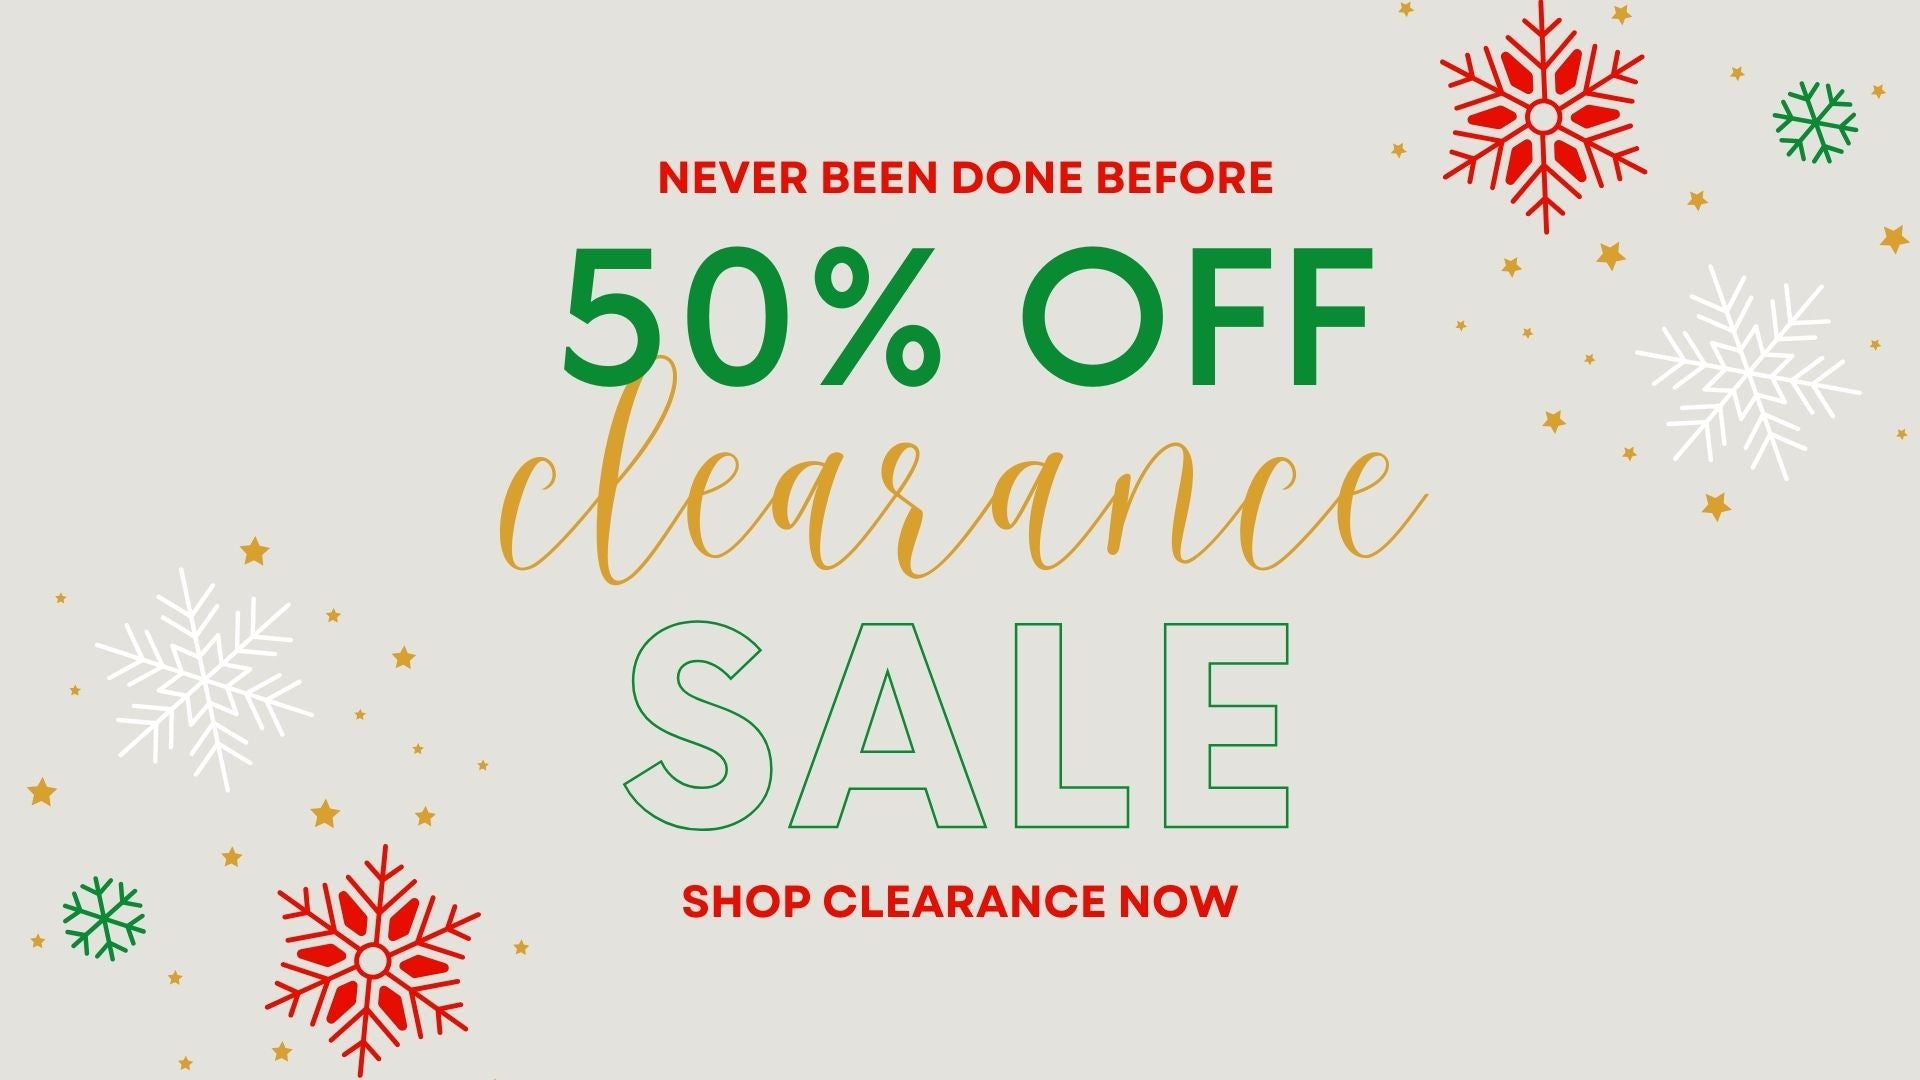 Online clearance specials